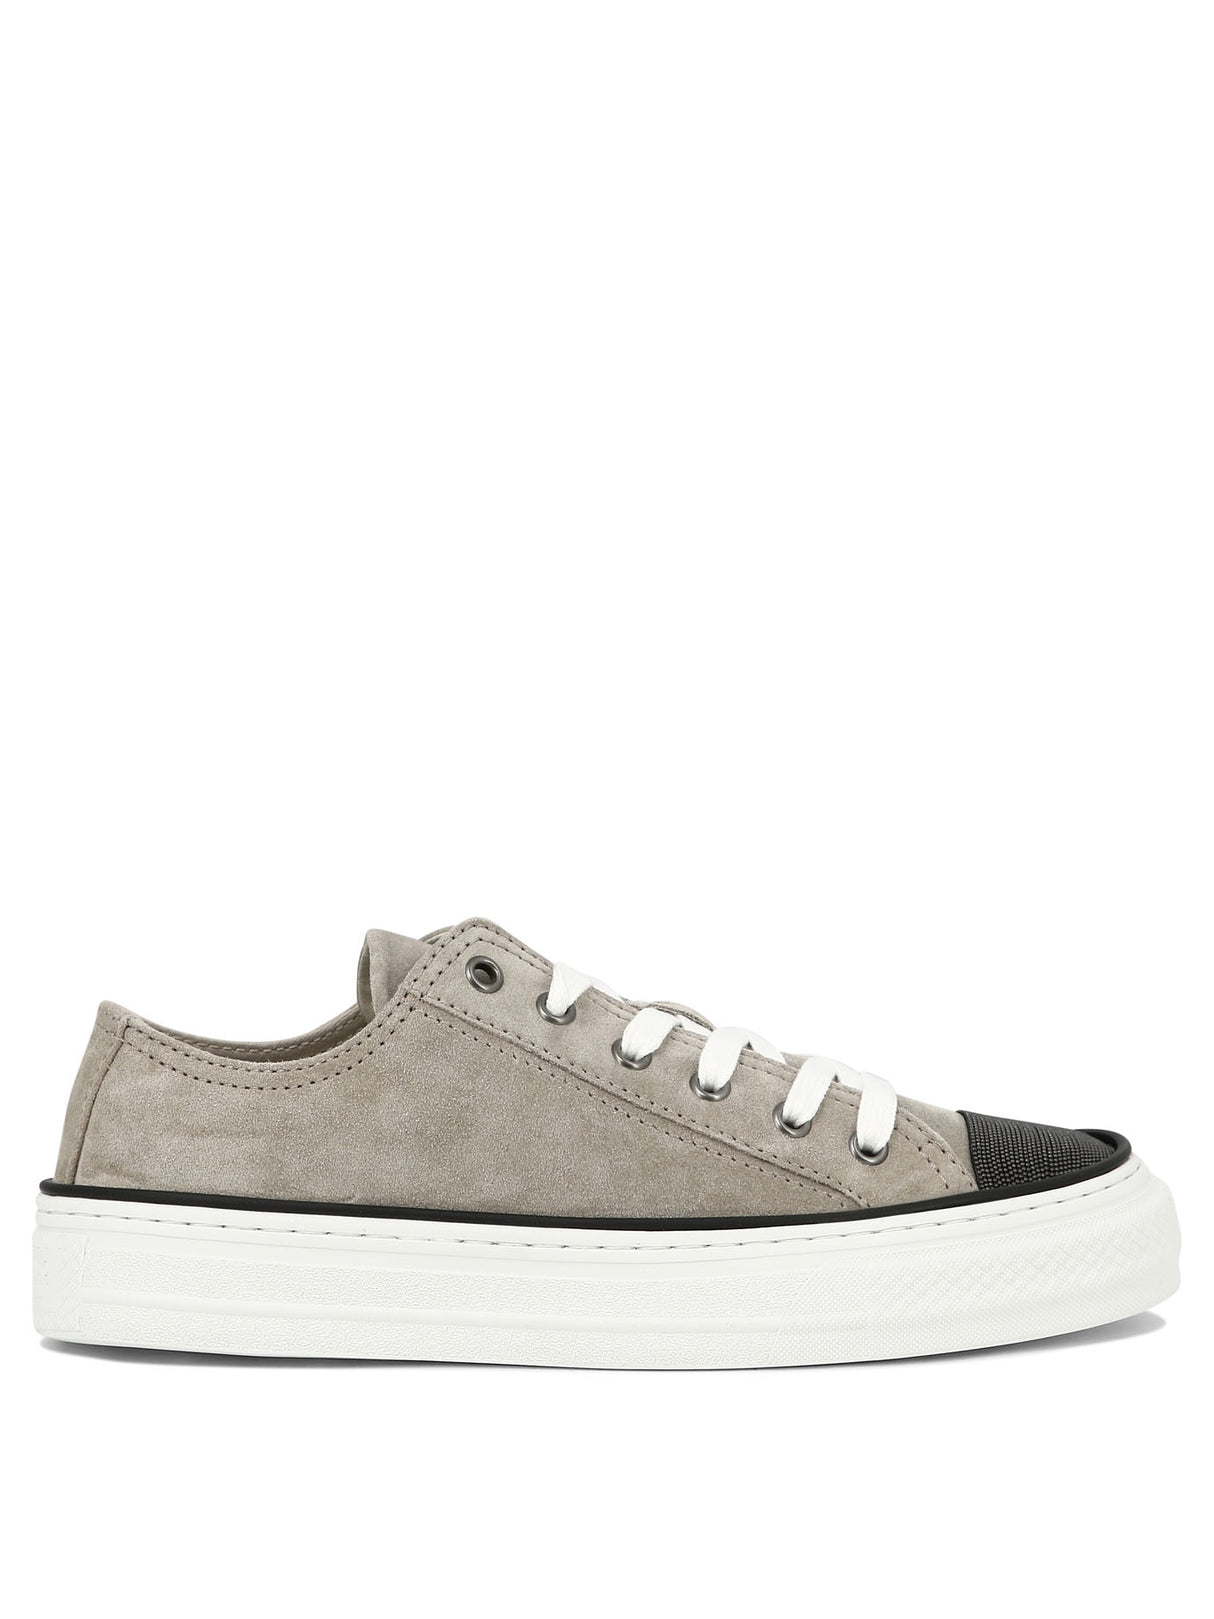 BRUNELLO CUCINELLI Luxurious Tan Suede Sneakers for Women - SS24 Collection